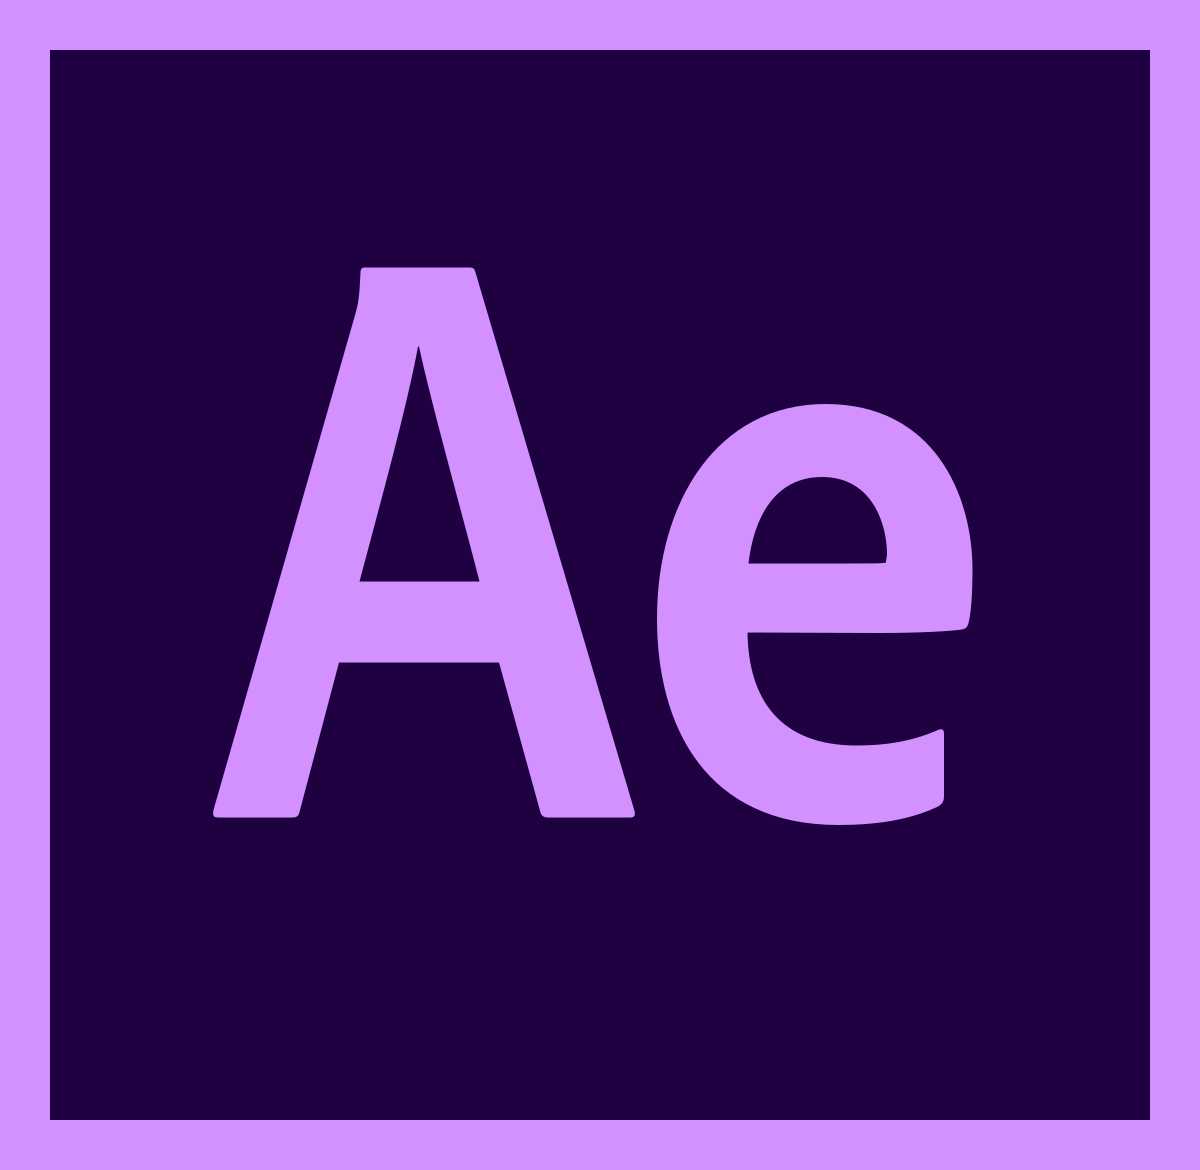 1200px-Adobe_After_Effects_CC_icon.svg.png